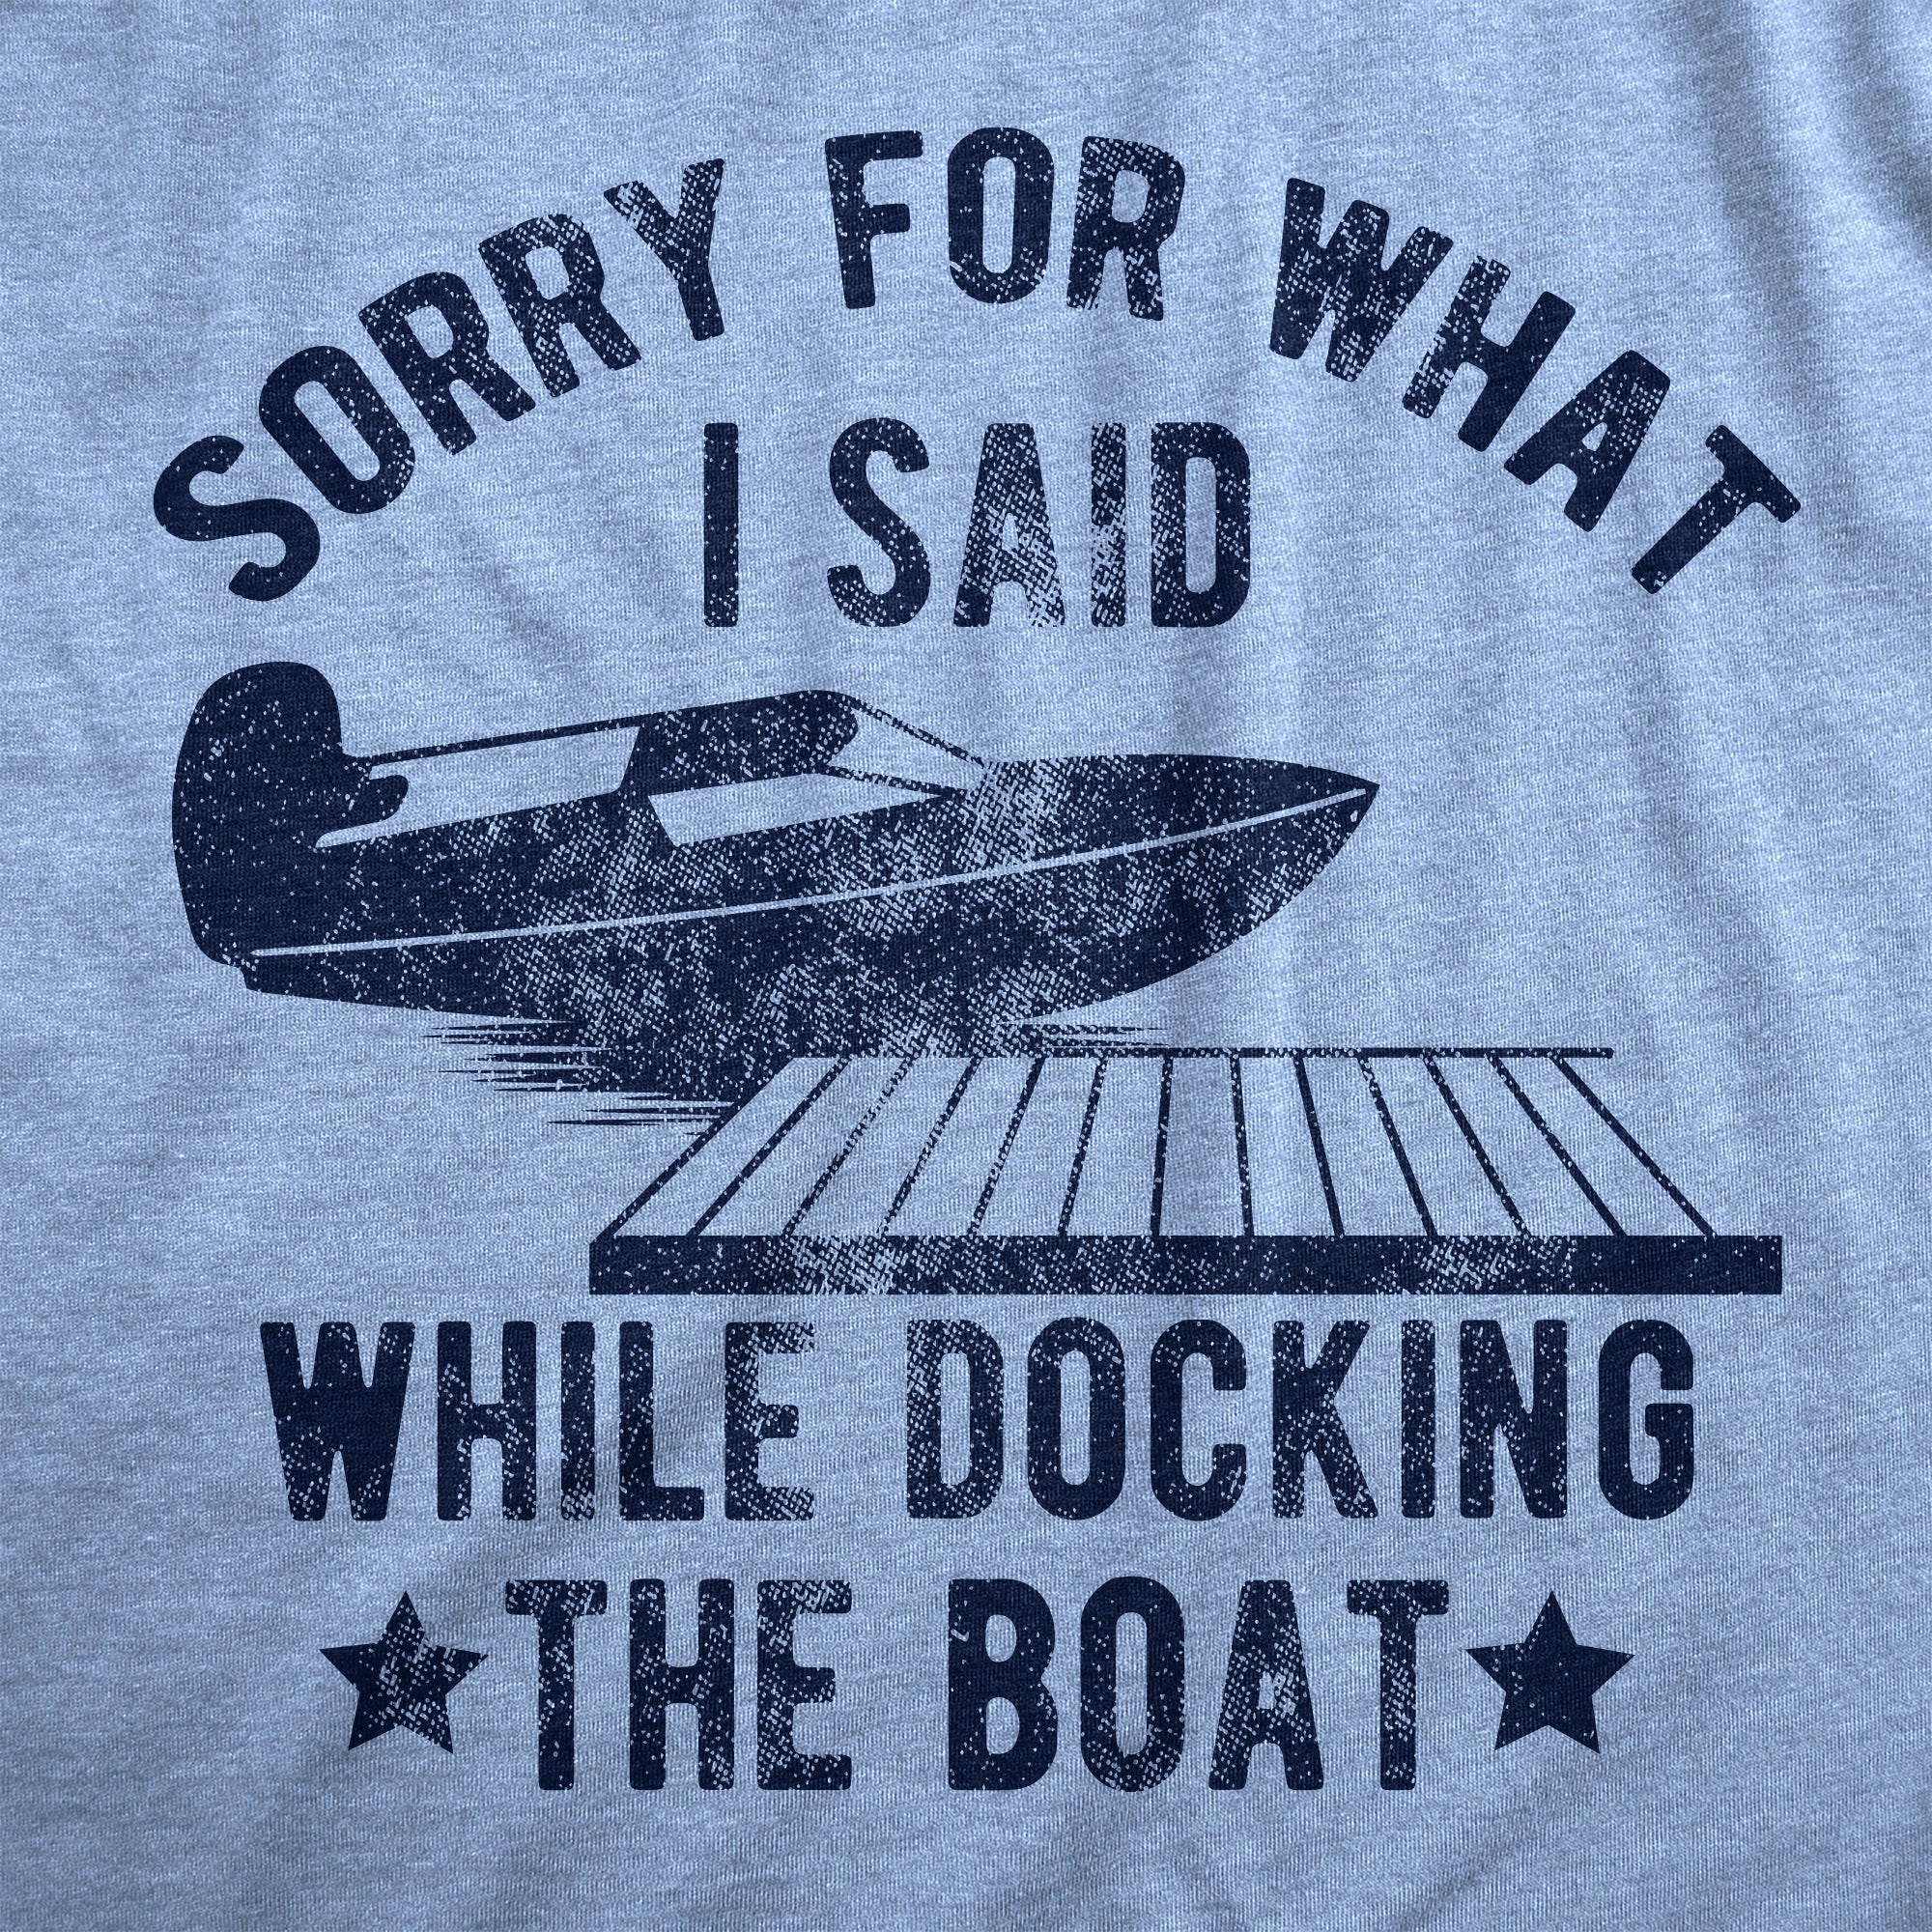 Funny Light Heather Blue - DOCKING Sorry For What I Said While Docking The Boat Womens T Shirt Nerdy sarcastic Tee